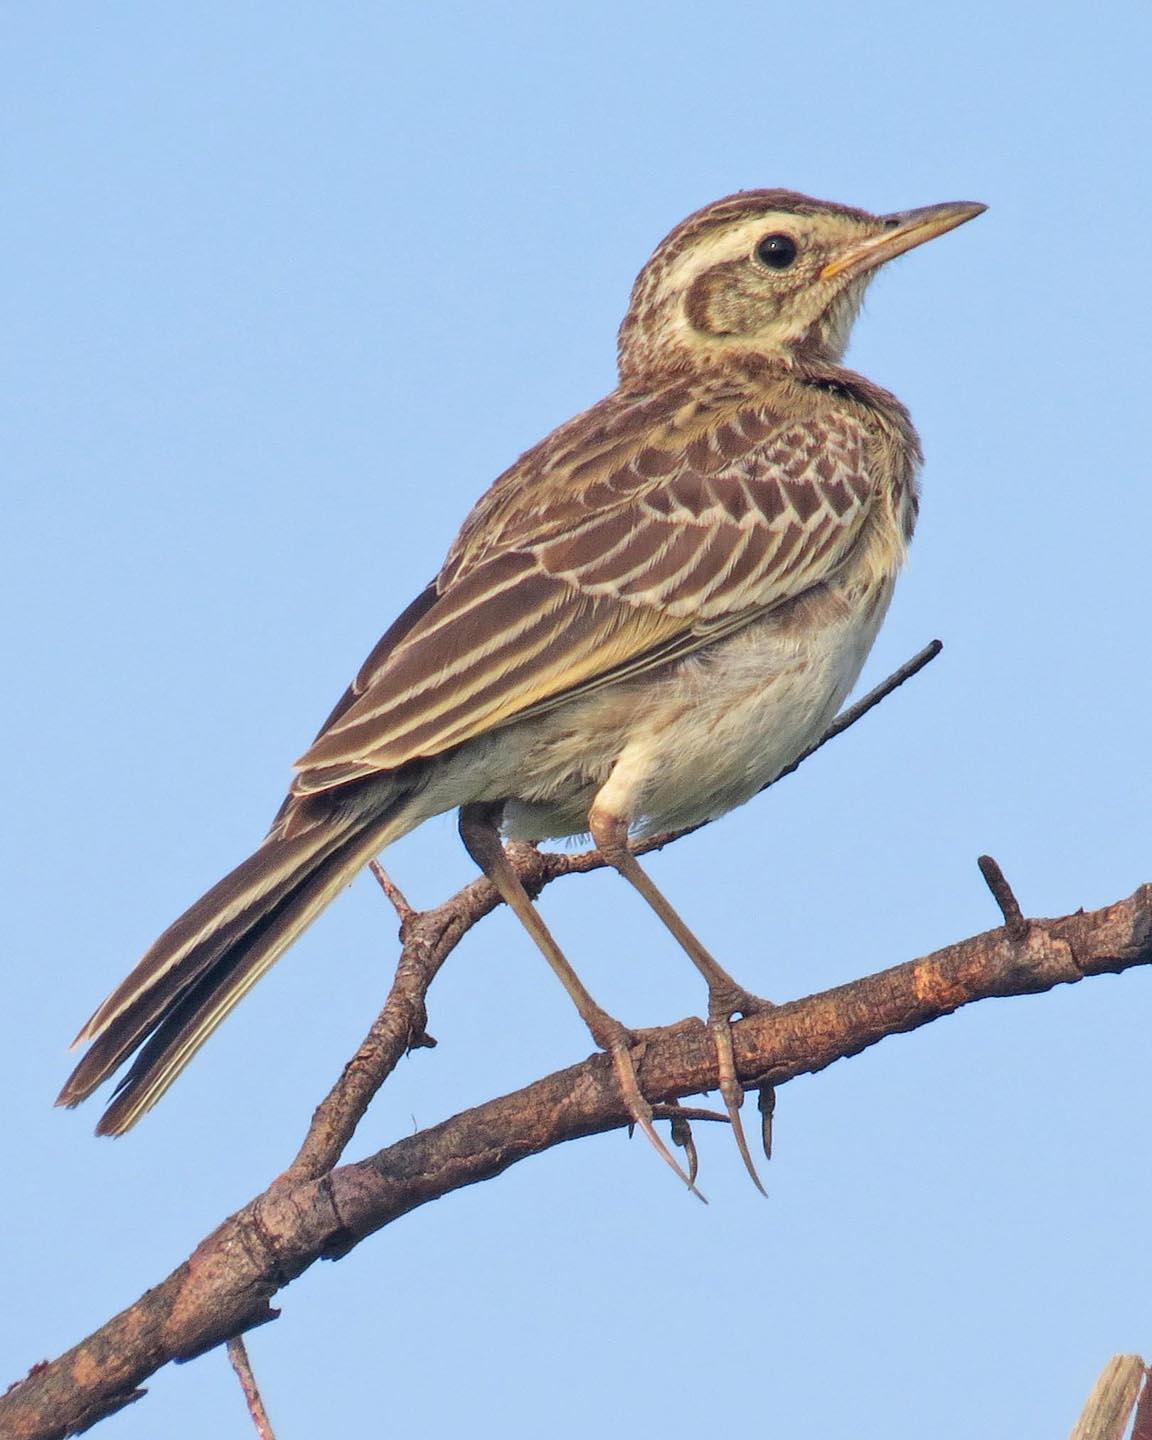 African Pipit Photo by Peter Boesman